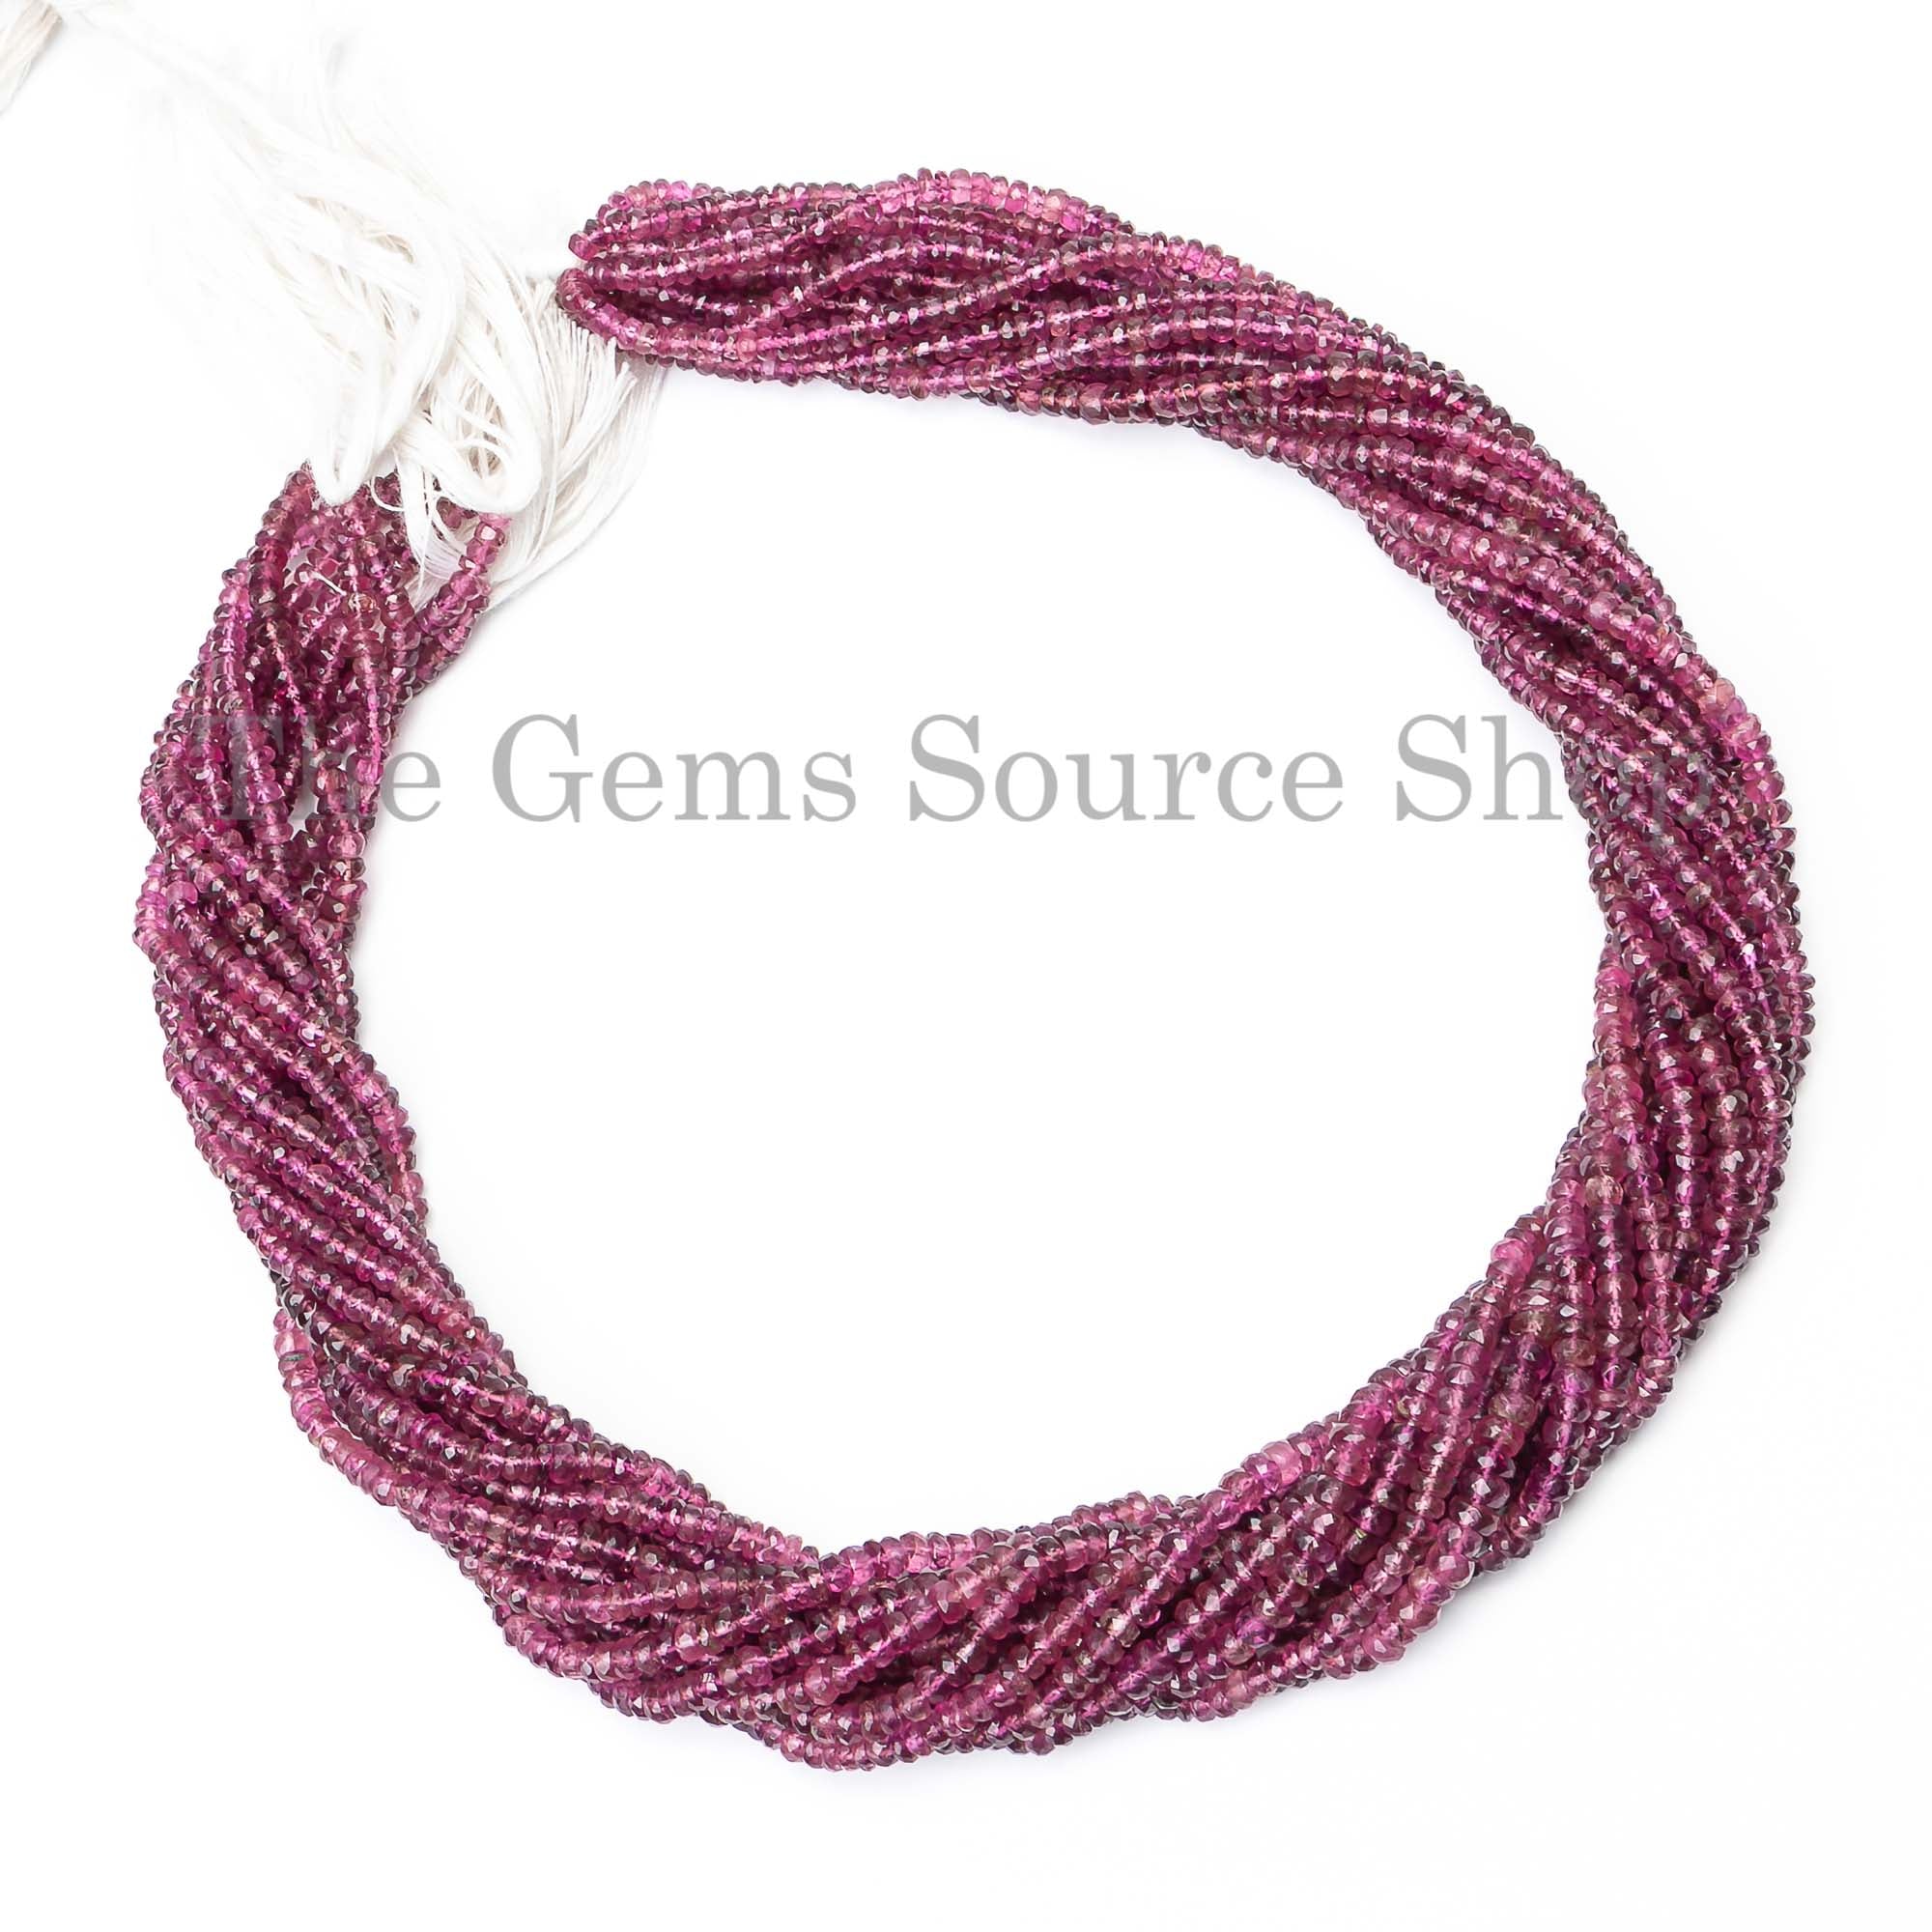 Rubellite Tourmaline Faceted Rondelle Beads, Rubellite Faceted Beads, 3-4mm Tourmaline Beads